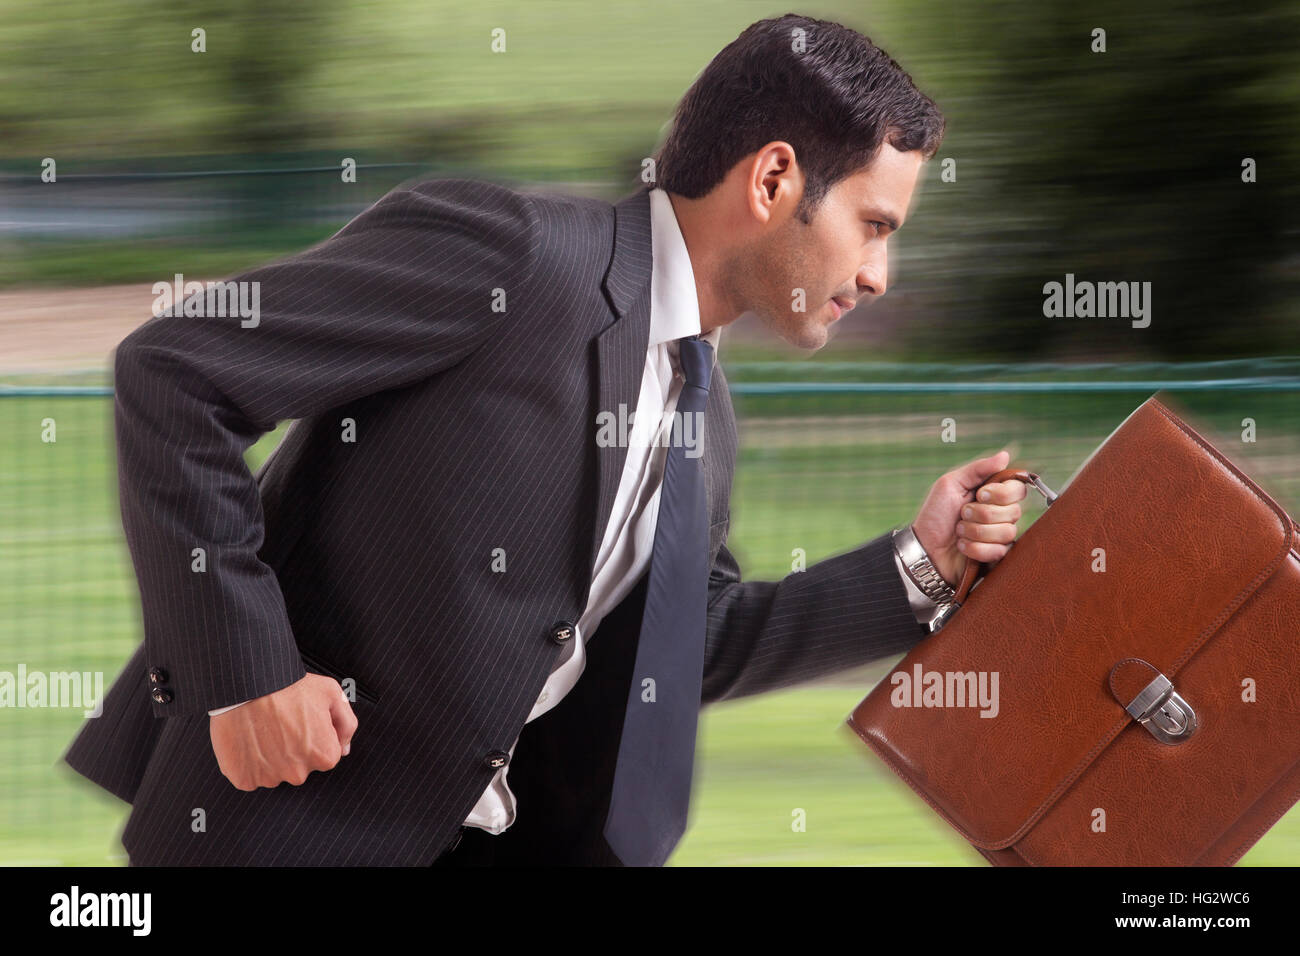 Businessman running with briefcase Banque D'Images